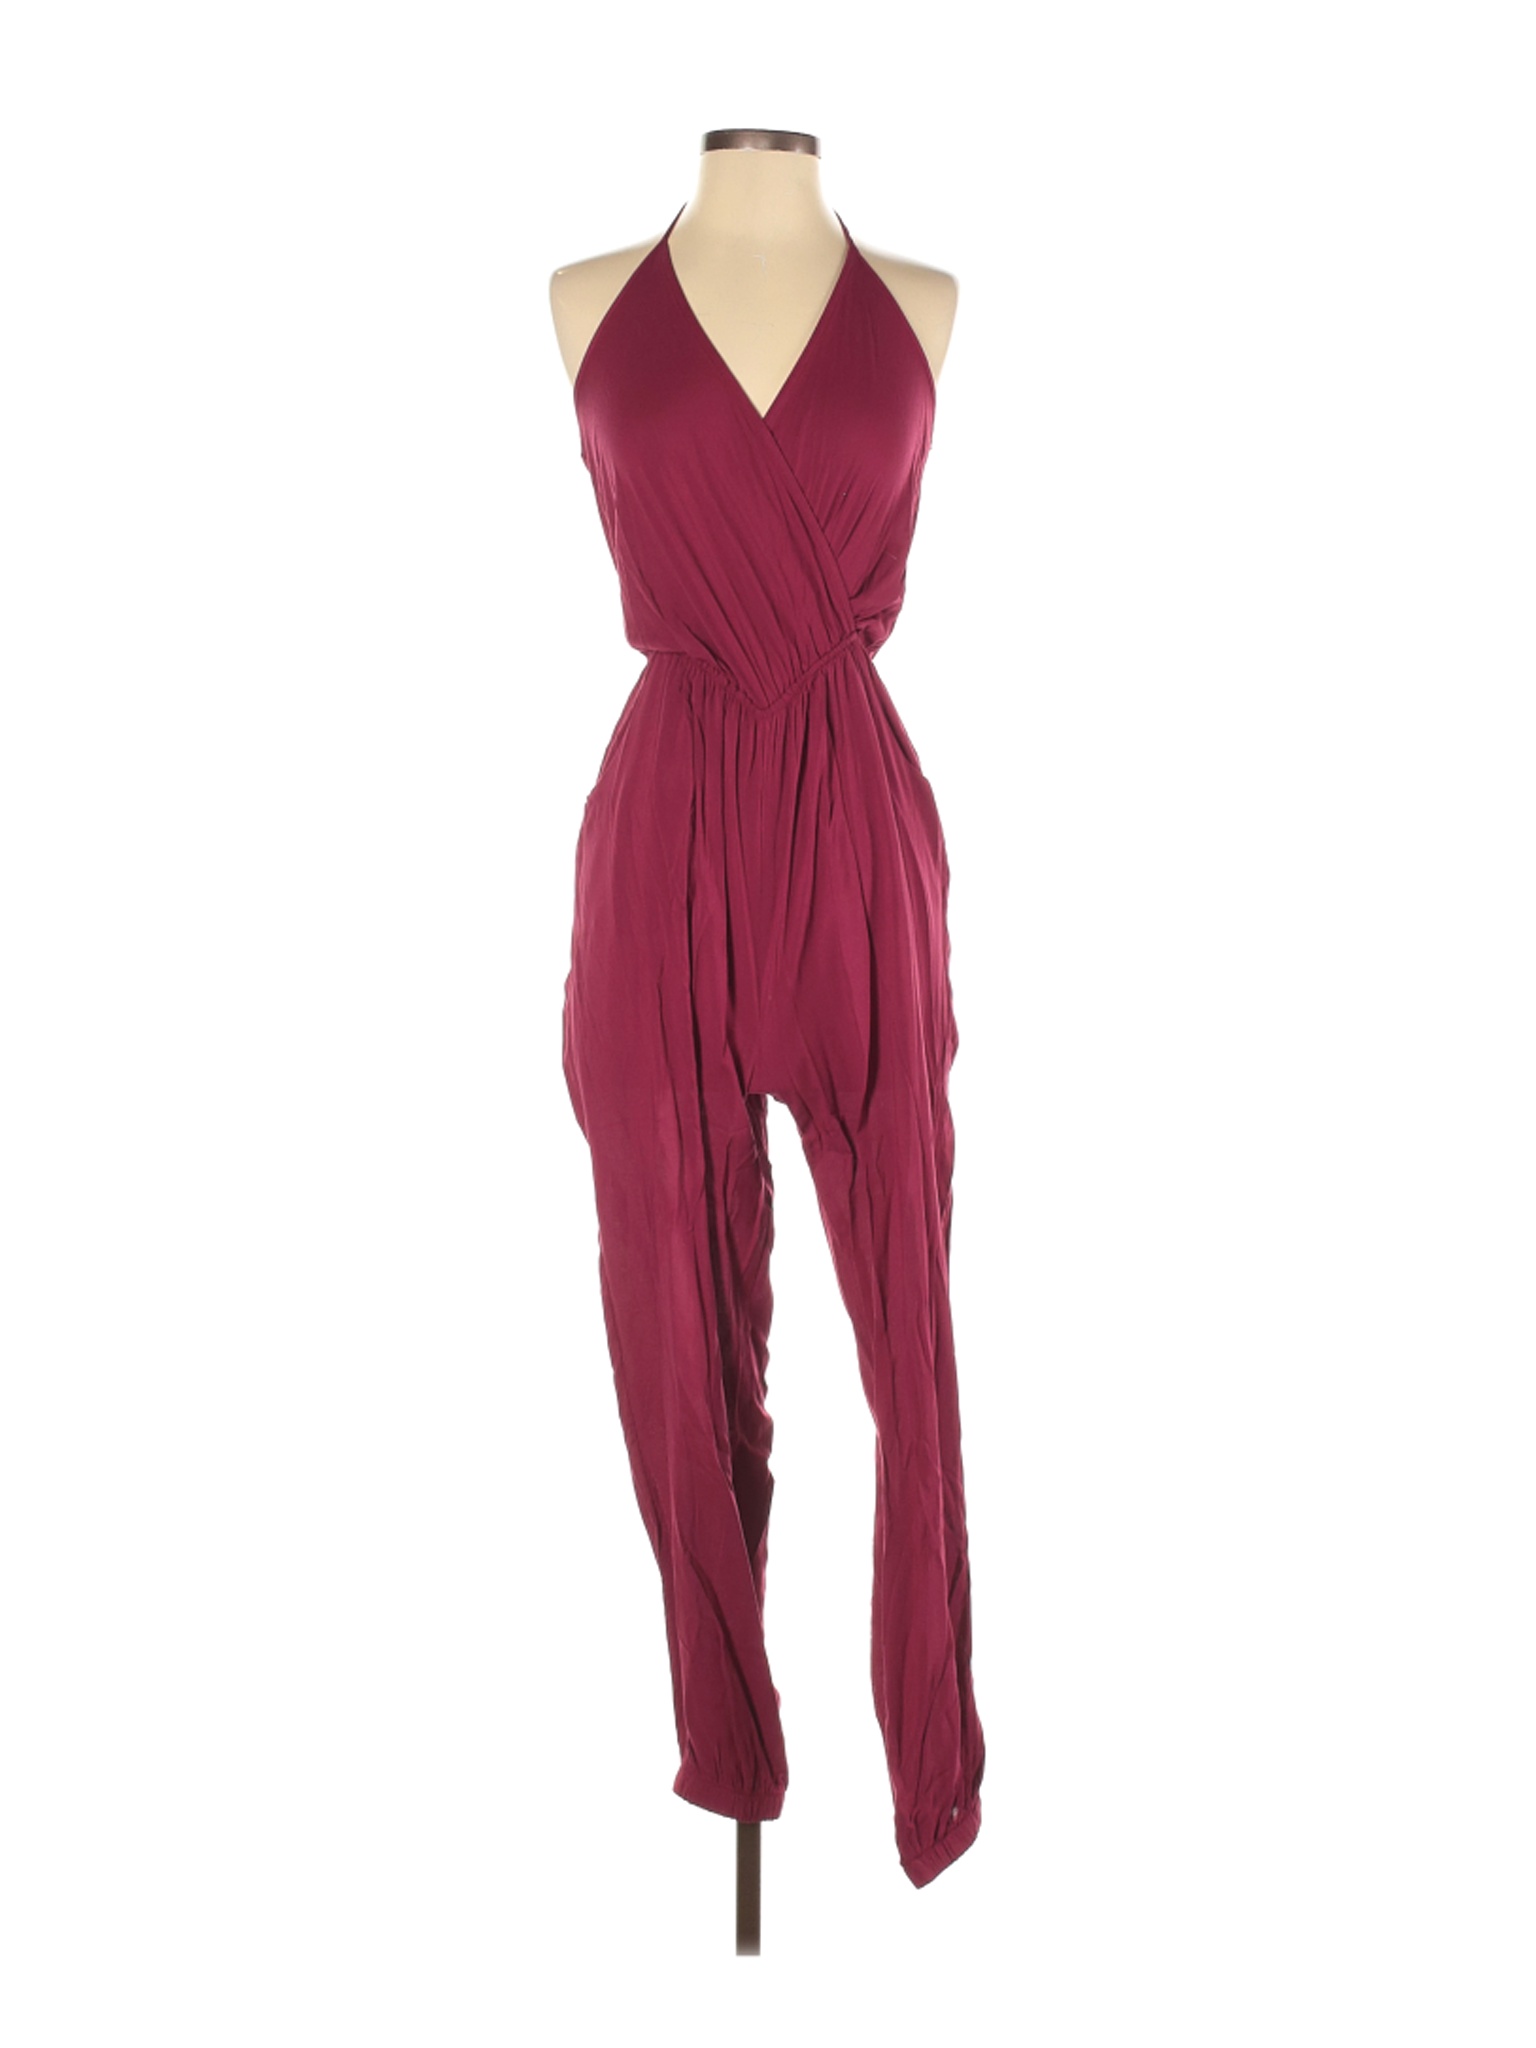 lulu's red halter jumpsuit with louis vuitton belt. Obsessed with